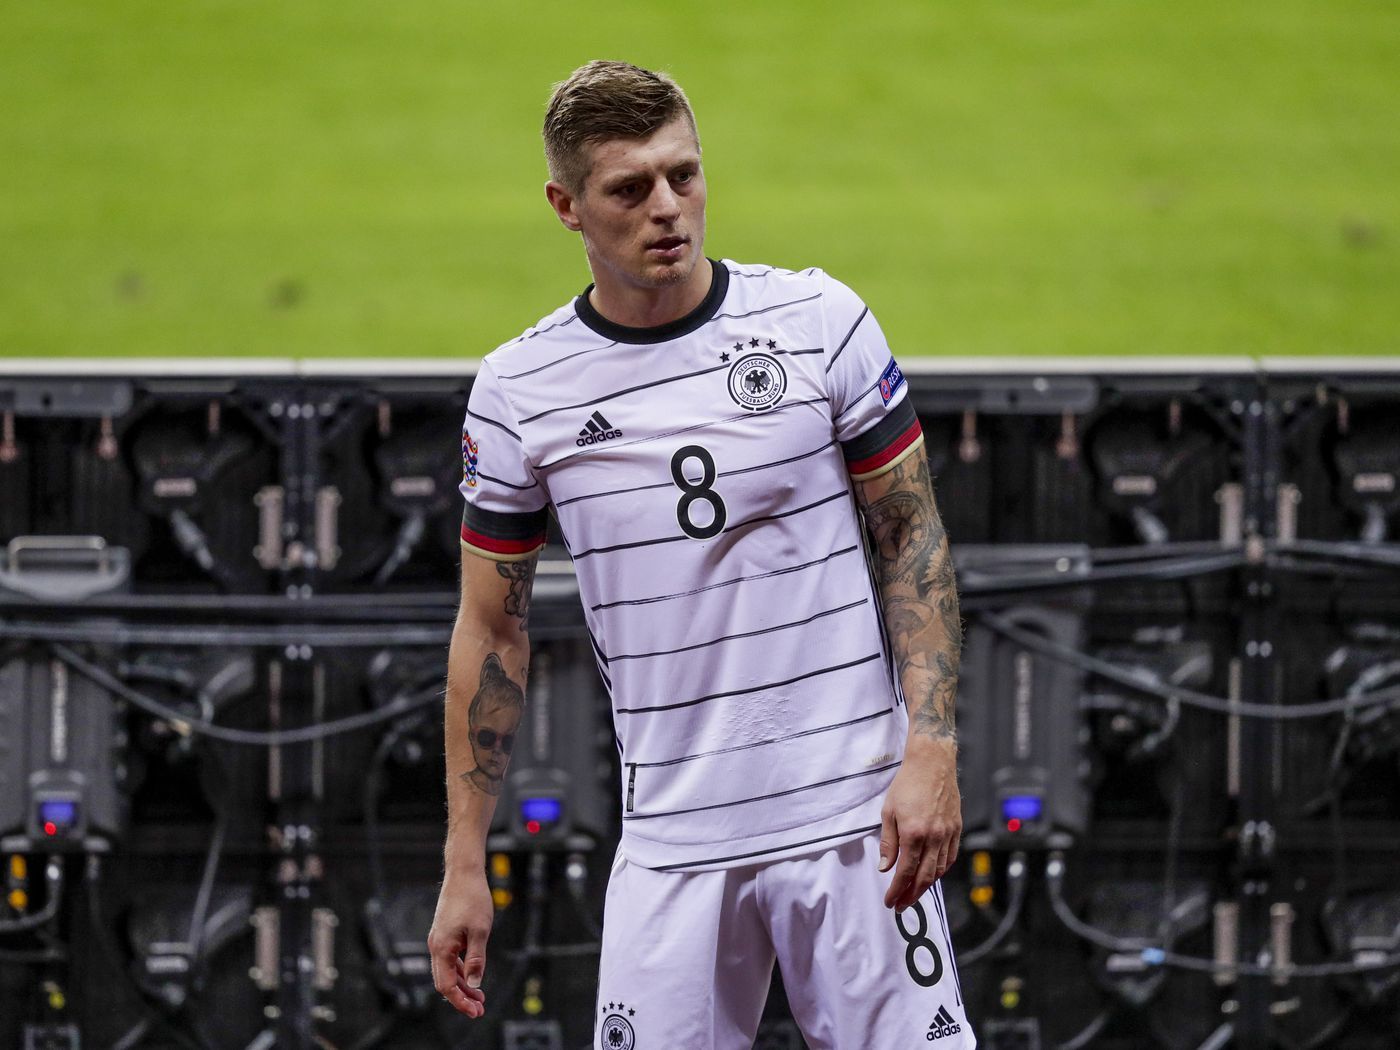 Toni Kroos to stop playing for Germany after the 2021 UEFA Euro -report